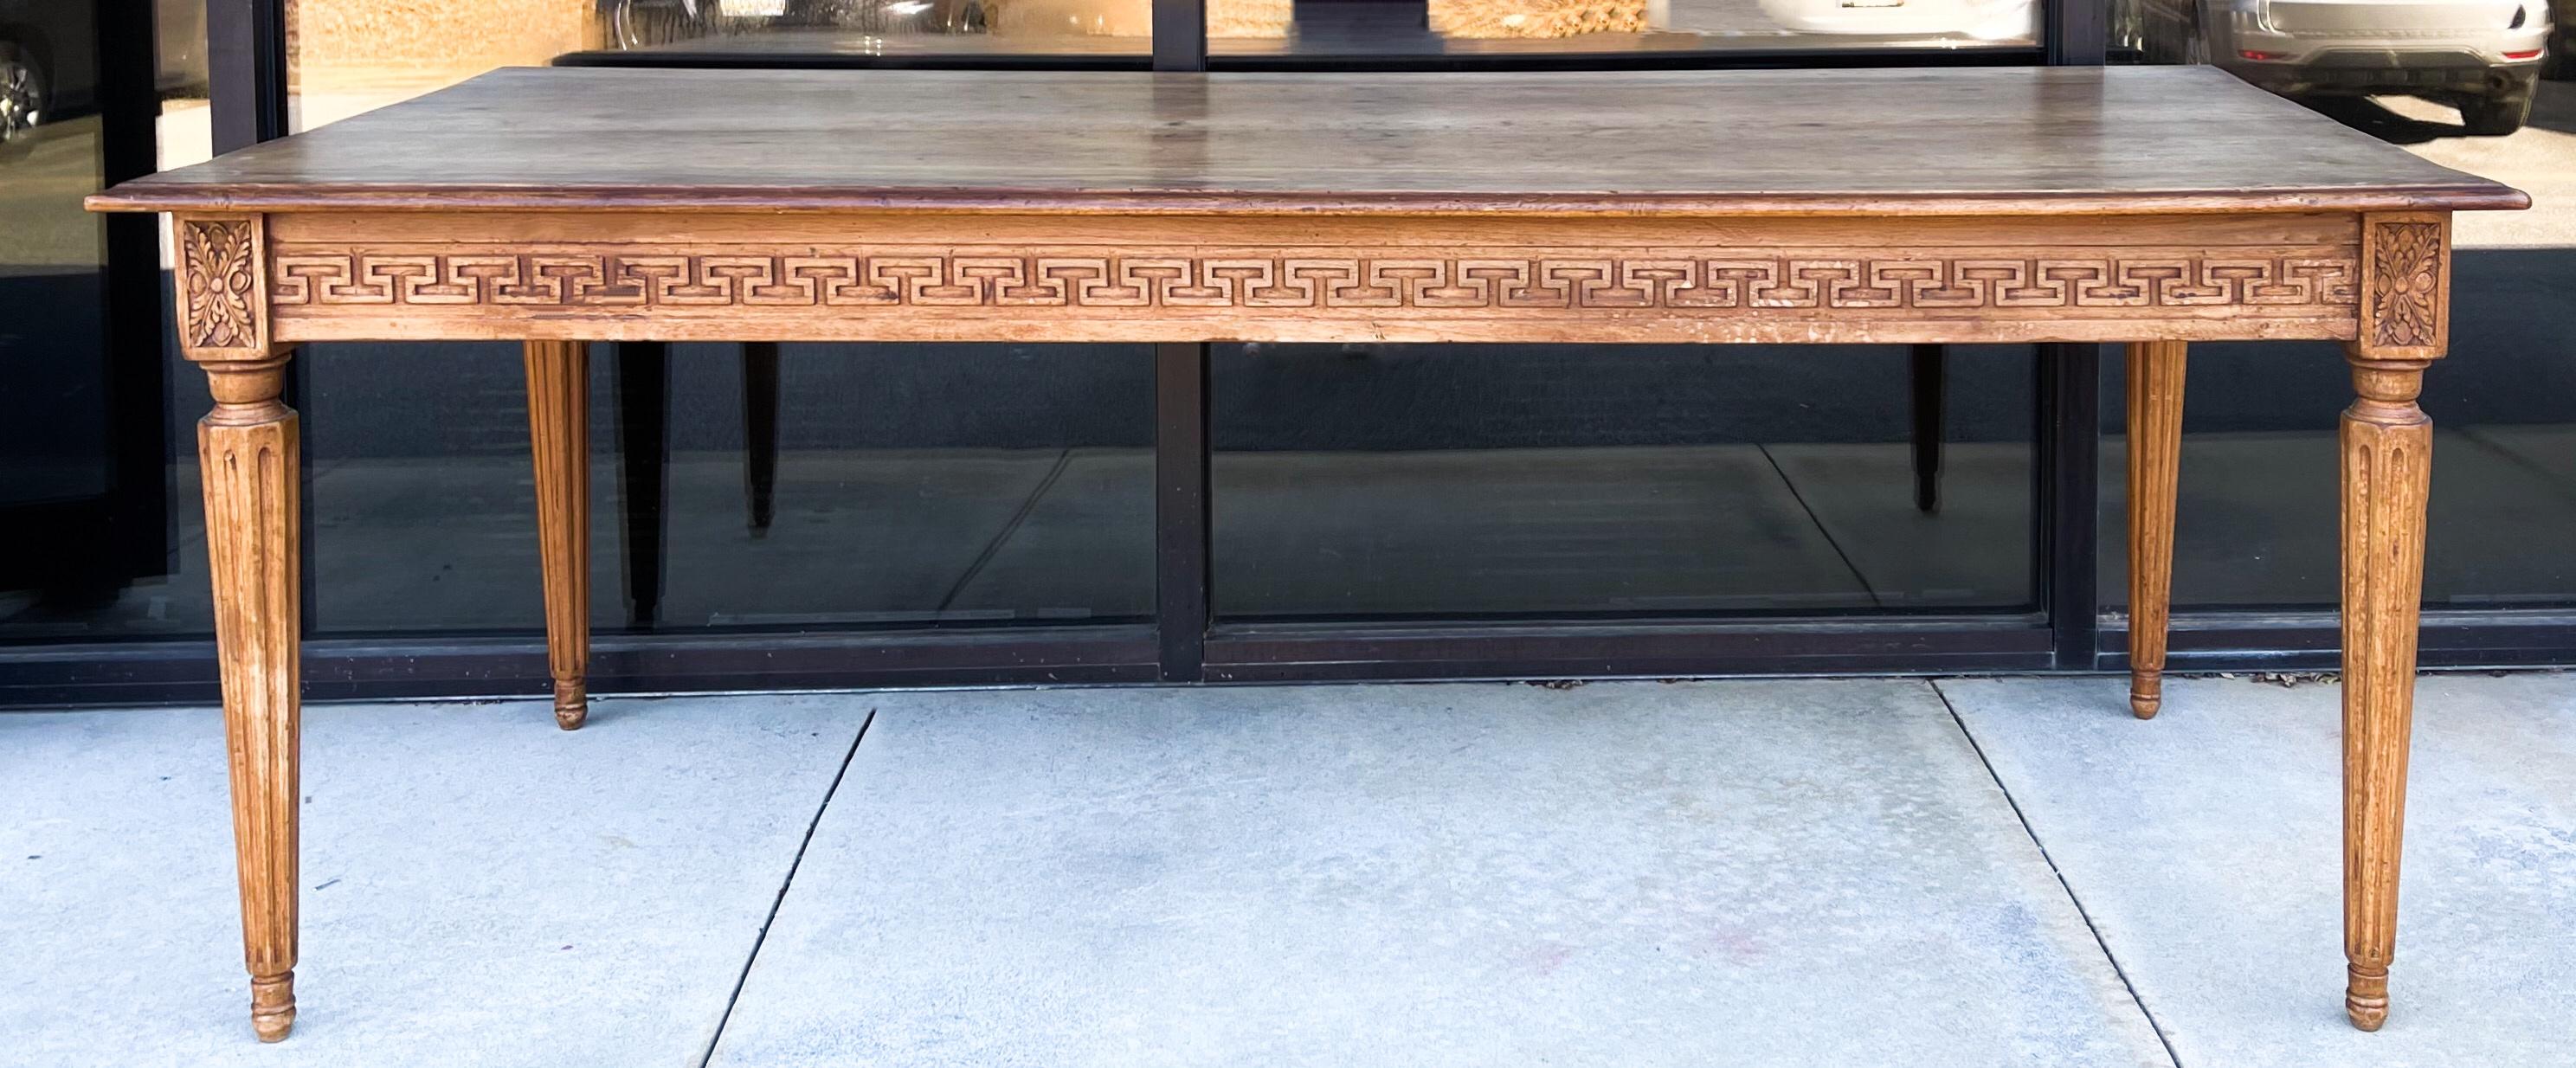 This is an ea,y 20th century neo-classical style Italian carved walnut farm table. It has two plank construction and butterfly joints. It is stamped on the underside.